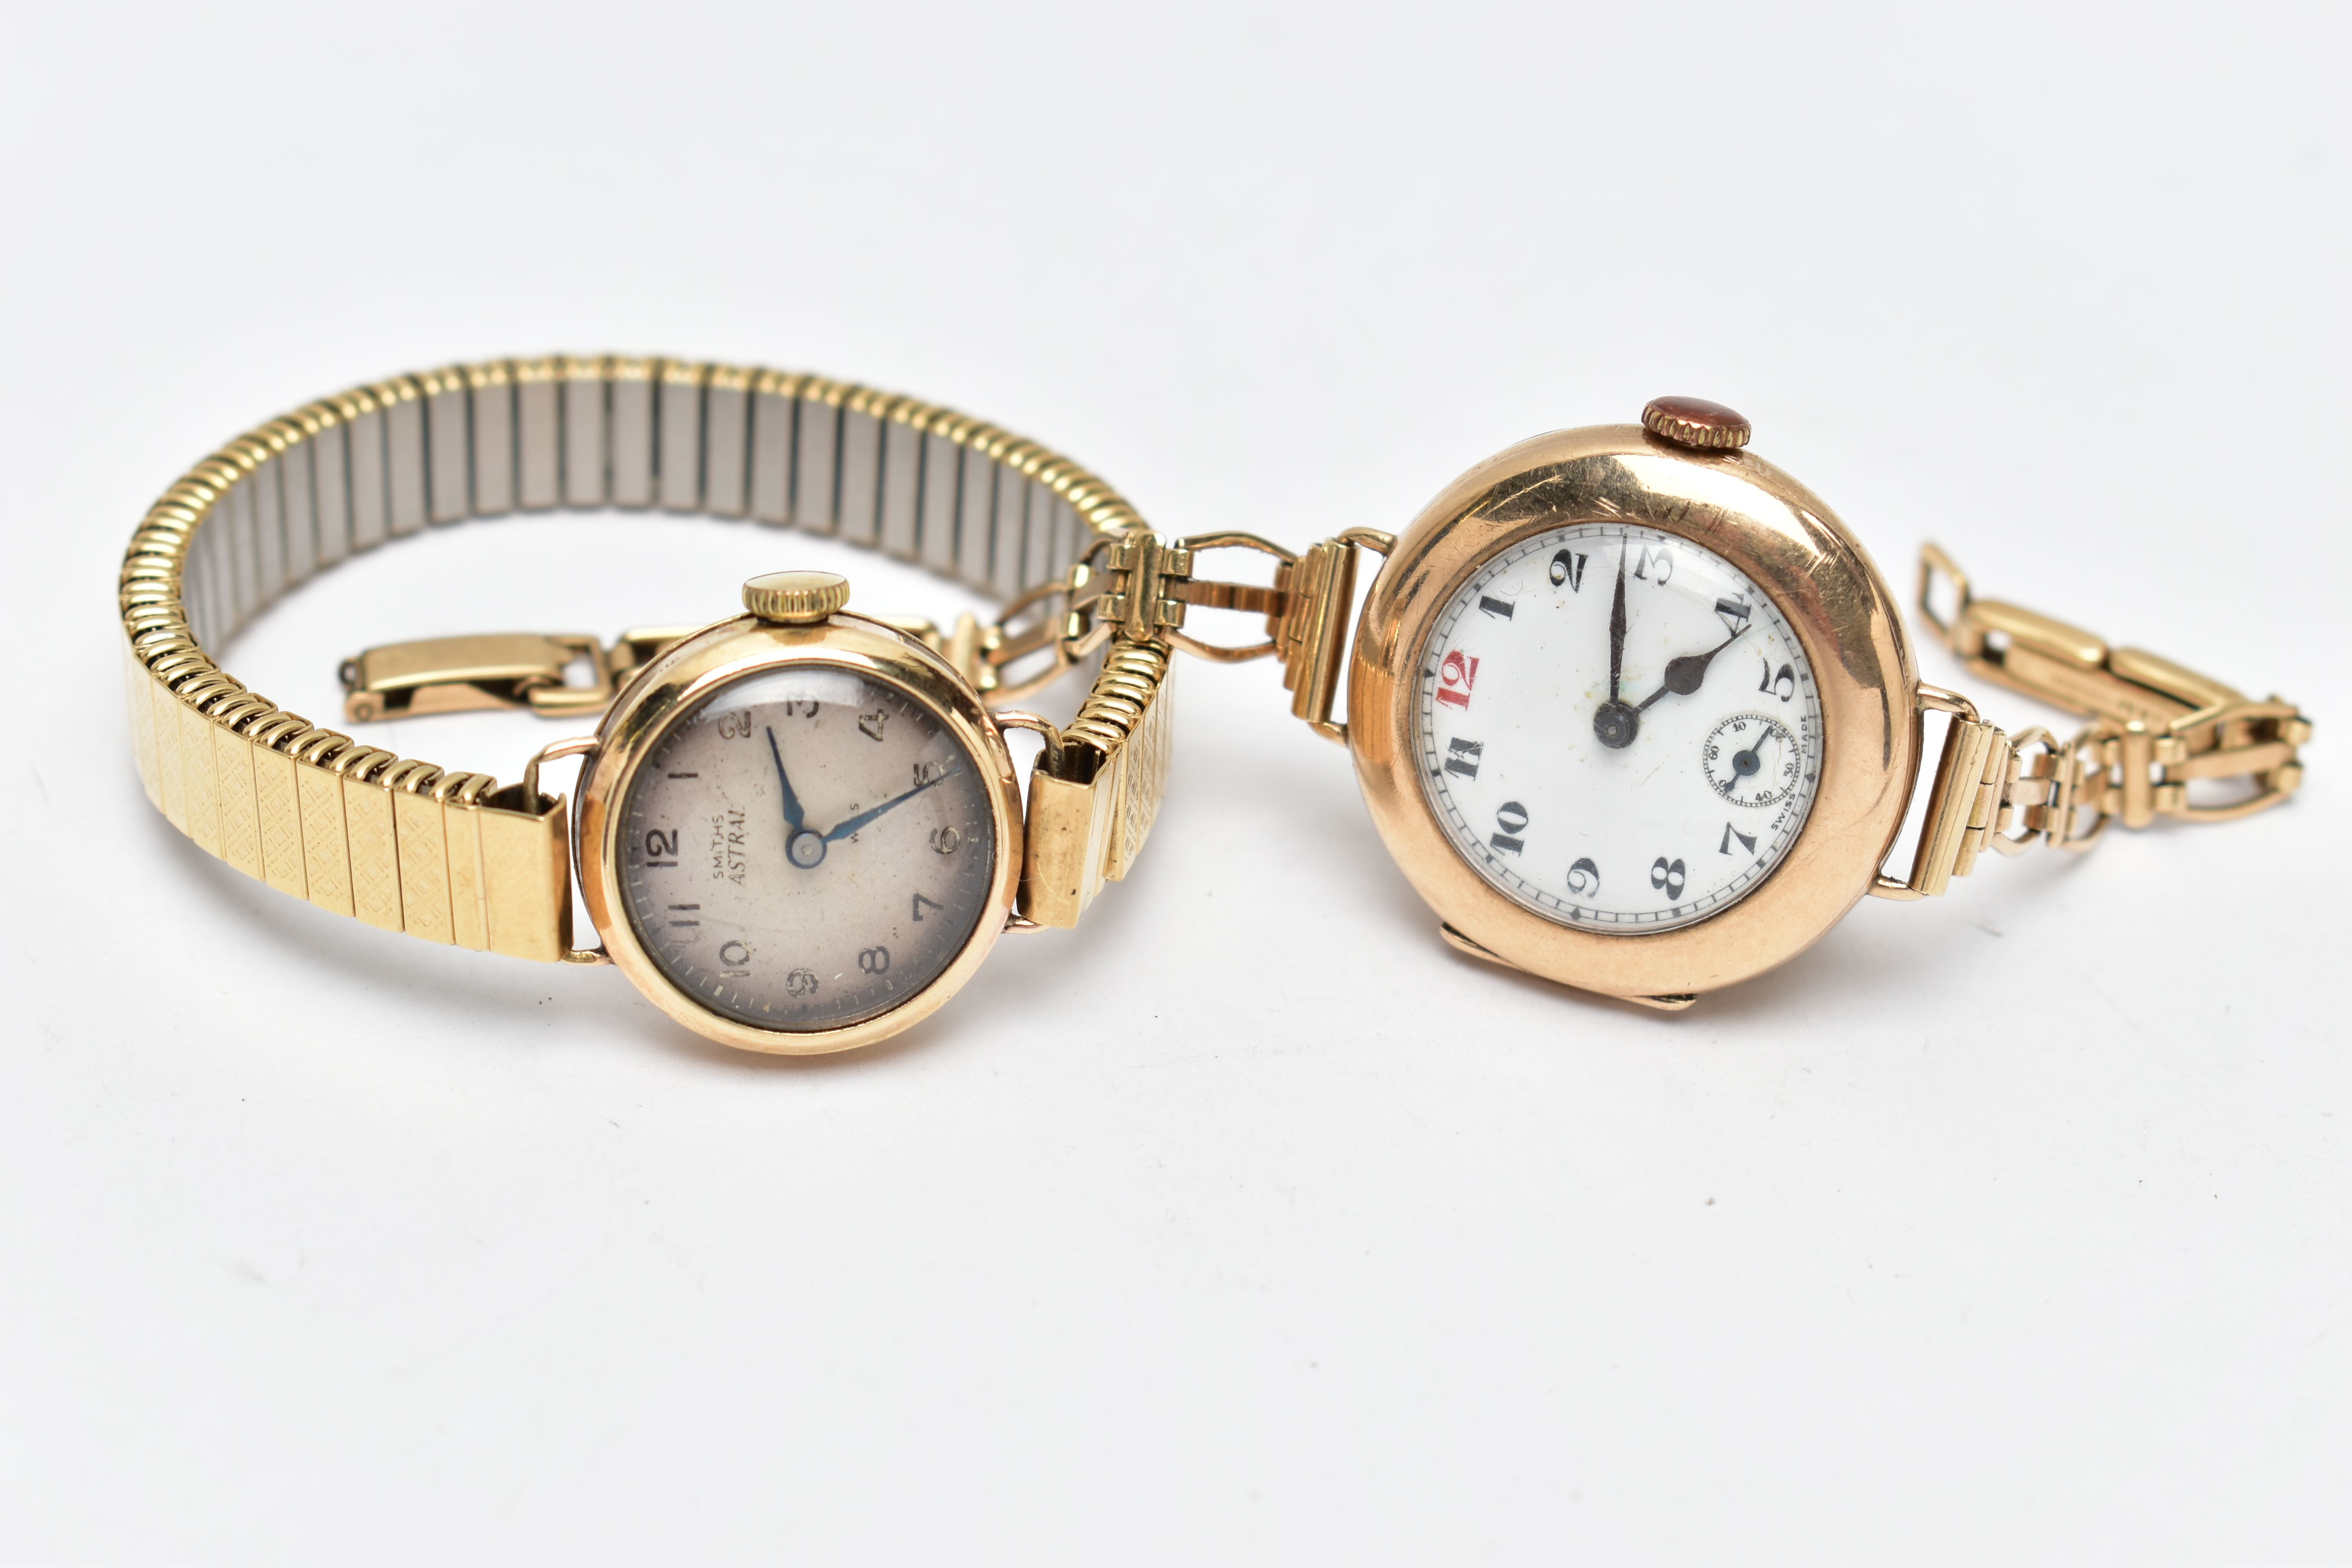 TWO LADY'S 9CT GOLD WRISTWATCHES, the first a manual wind watch, with a round white dial, Arabic